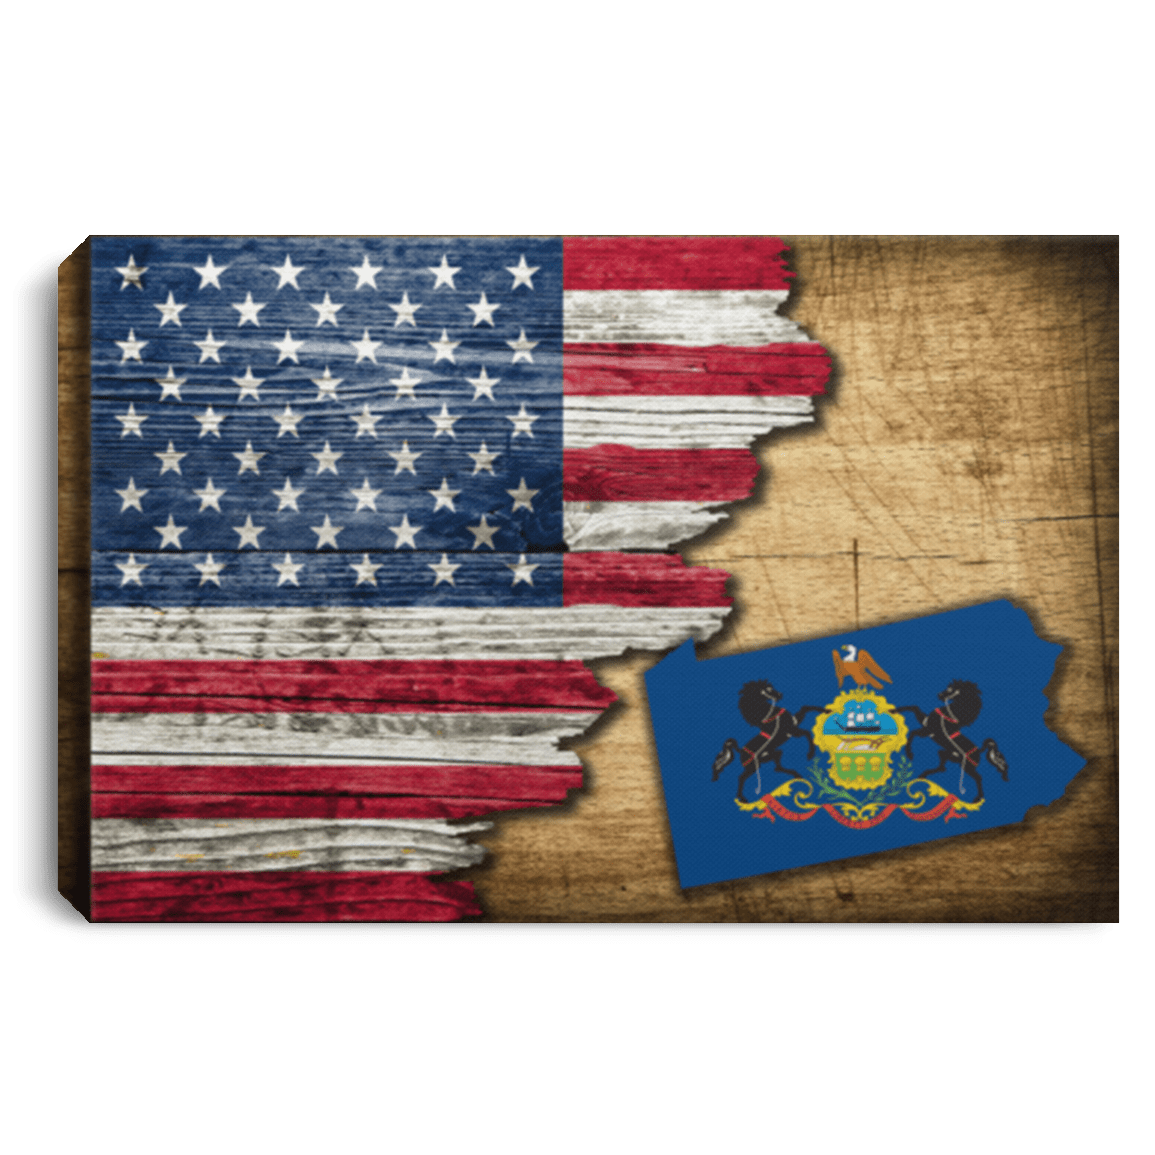 United States/Pennsylvania Flag Ripped Effect 12X8 Inches Landscape Canvas .75In Frame